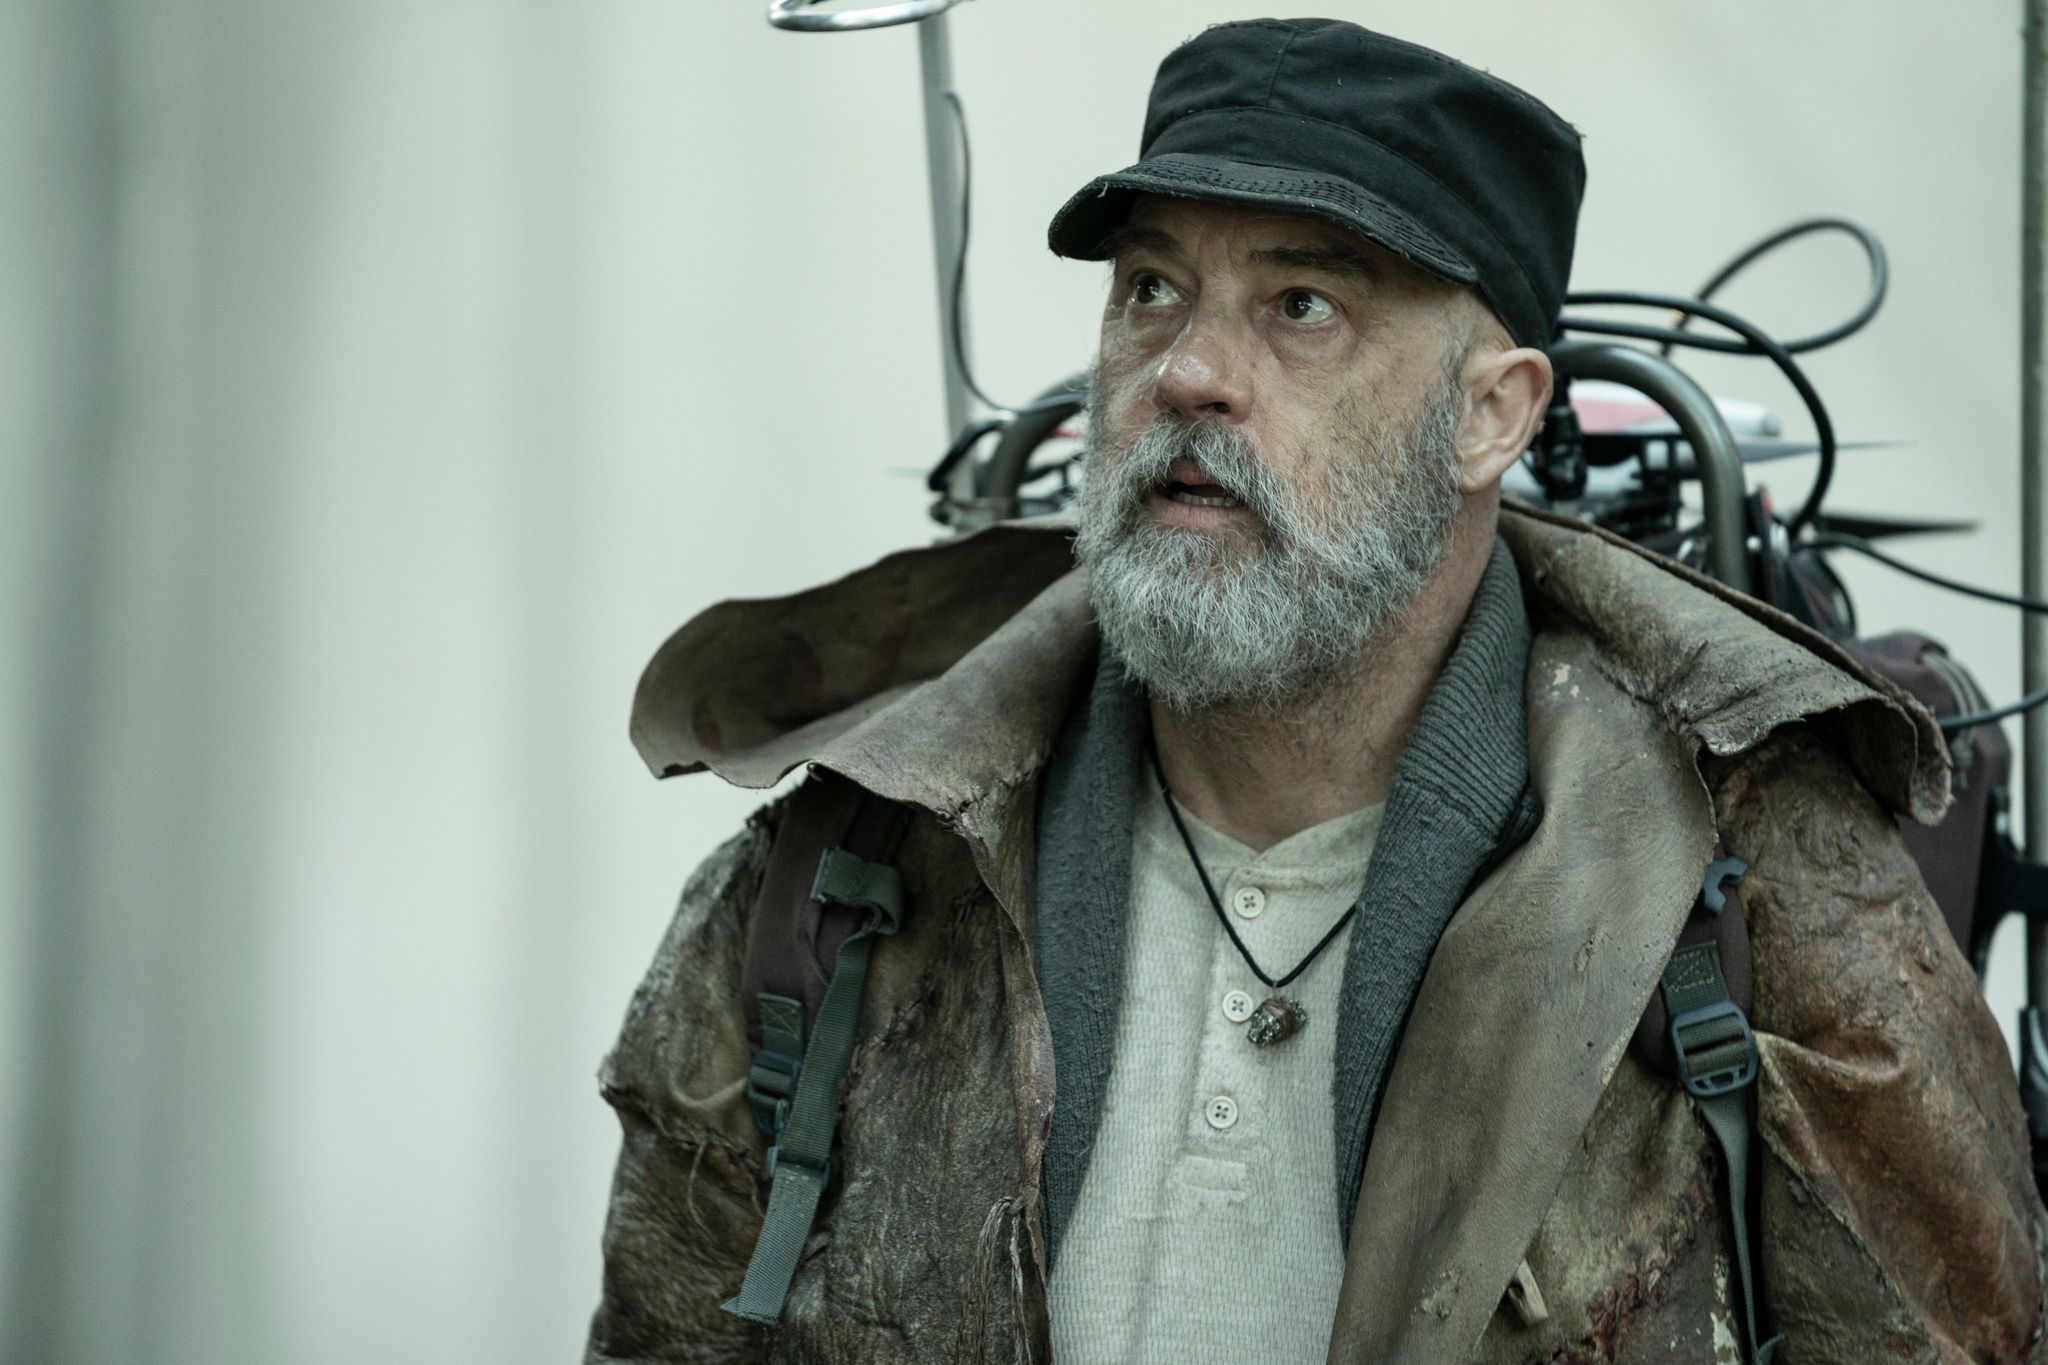 Anthony Edwards in character in Tales of the Walking Dead with a gray beard and cap wearing a contraption on his back